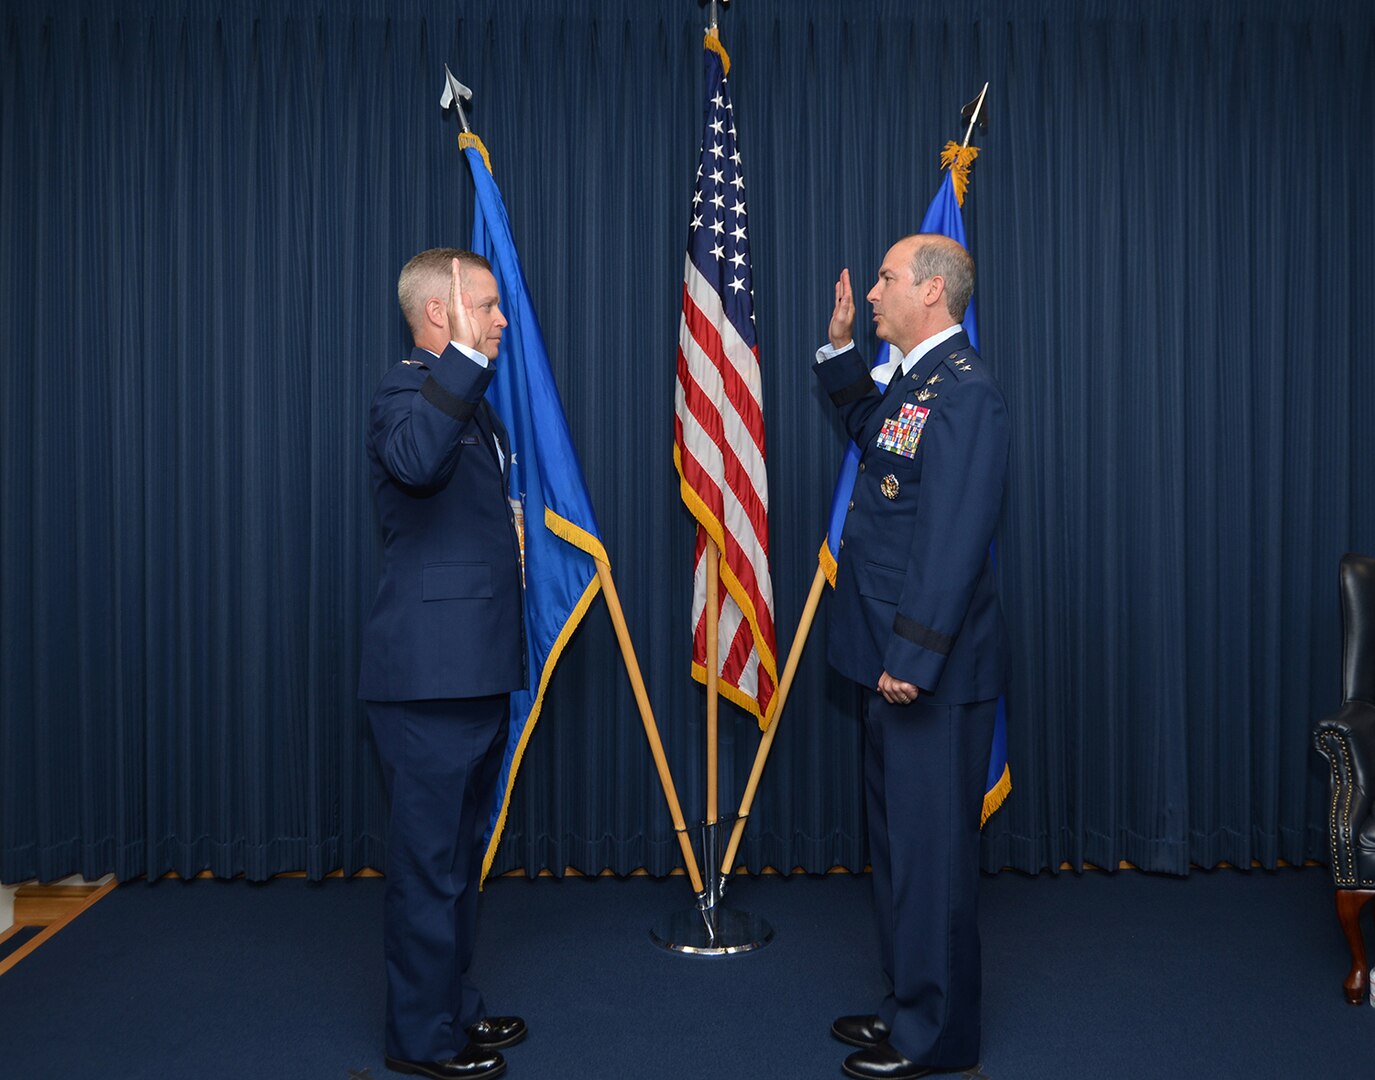 Two Airmen in dress uniform hold up right hands during the Oath of Office.